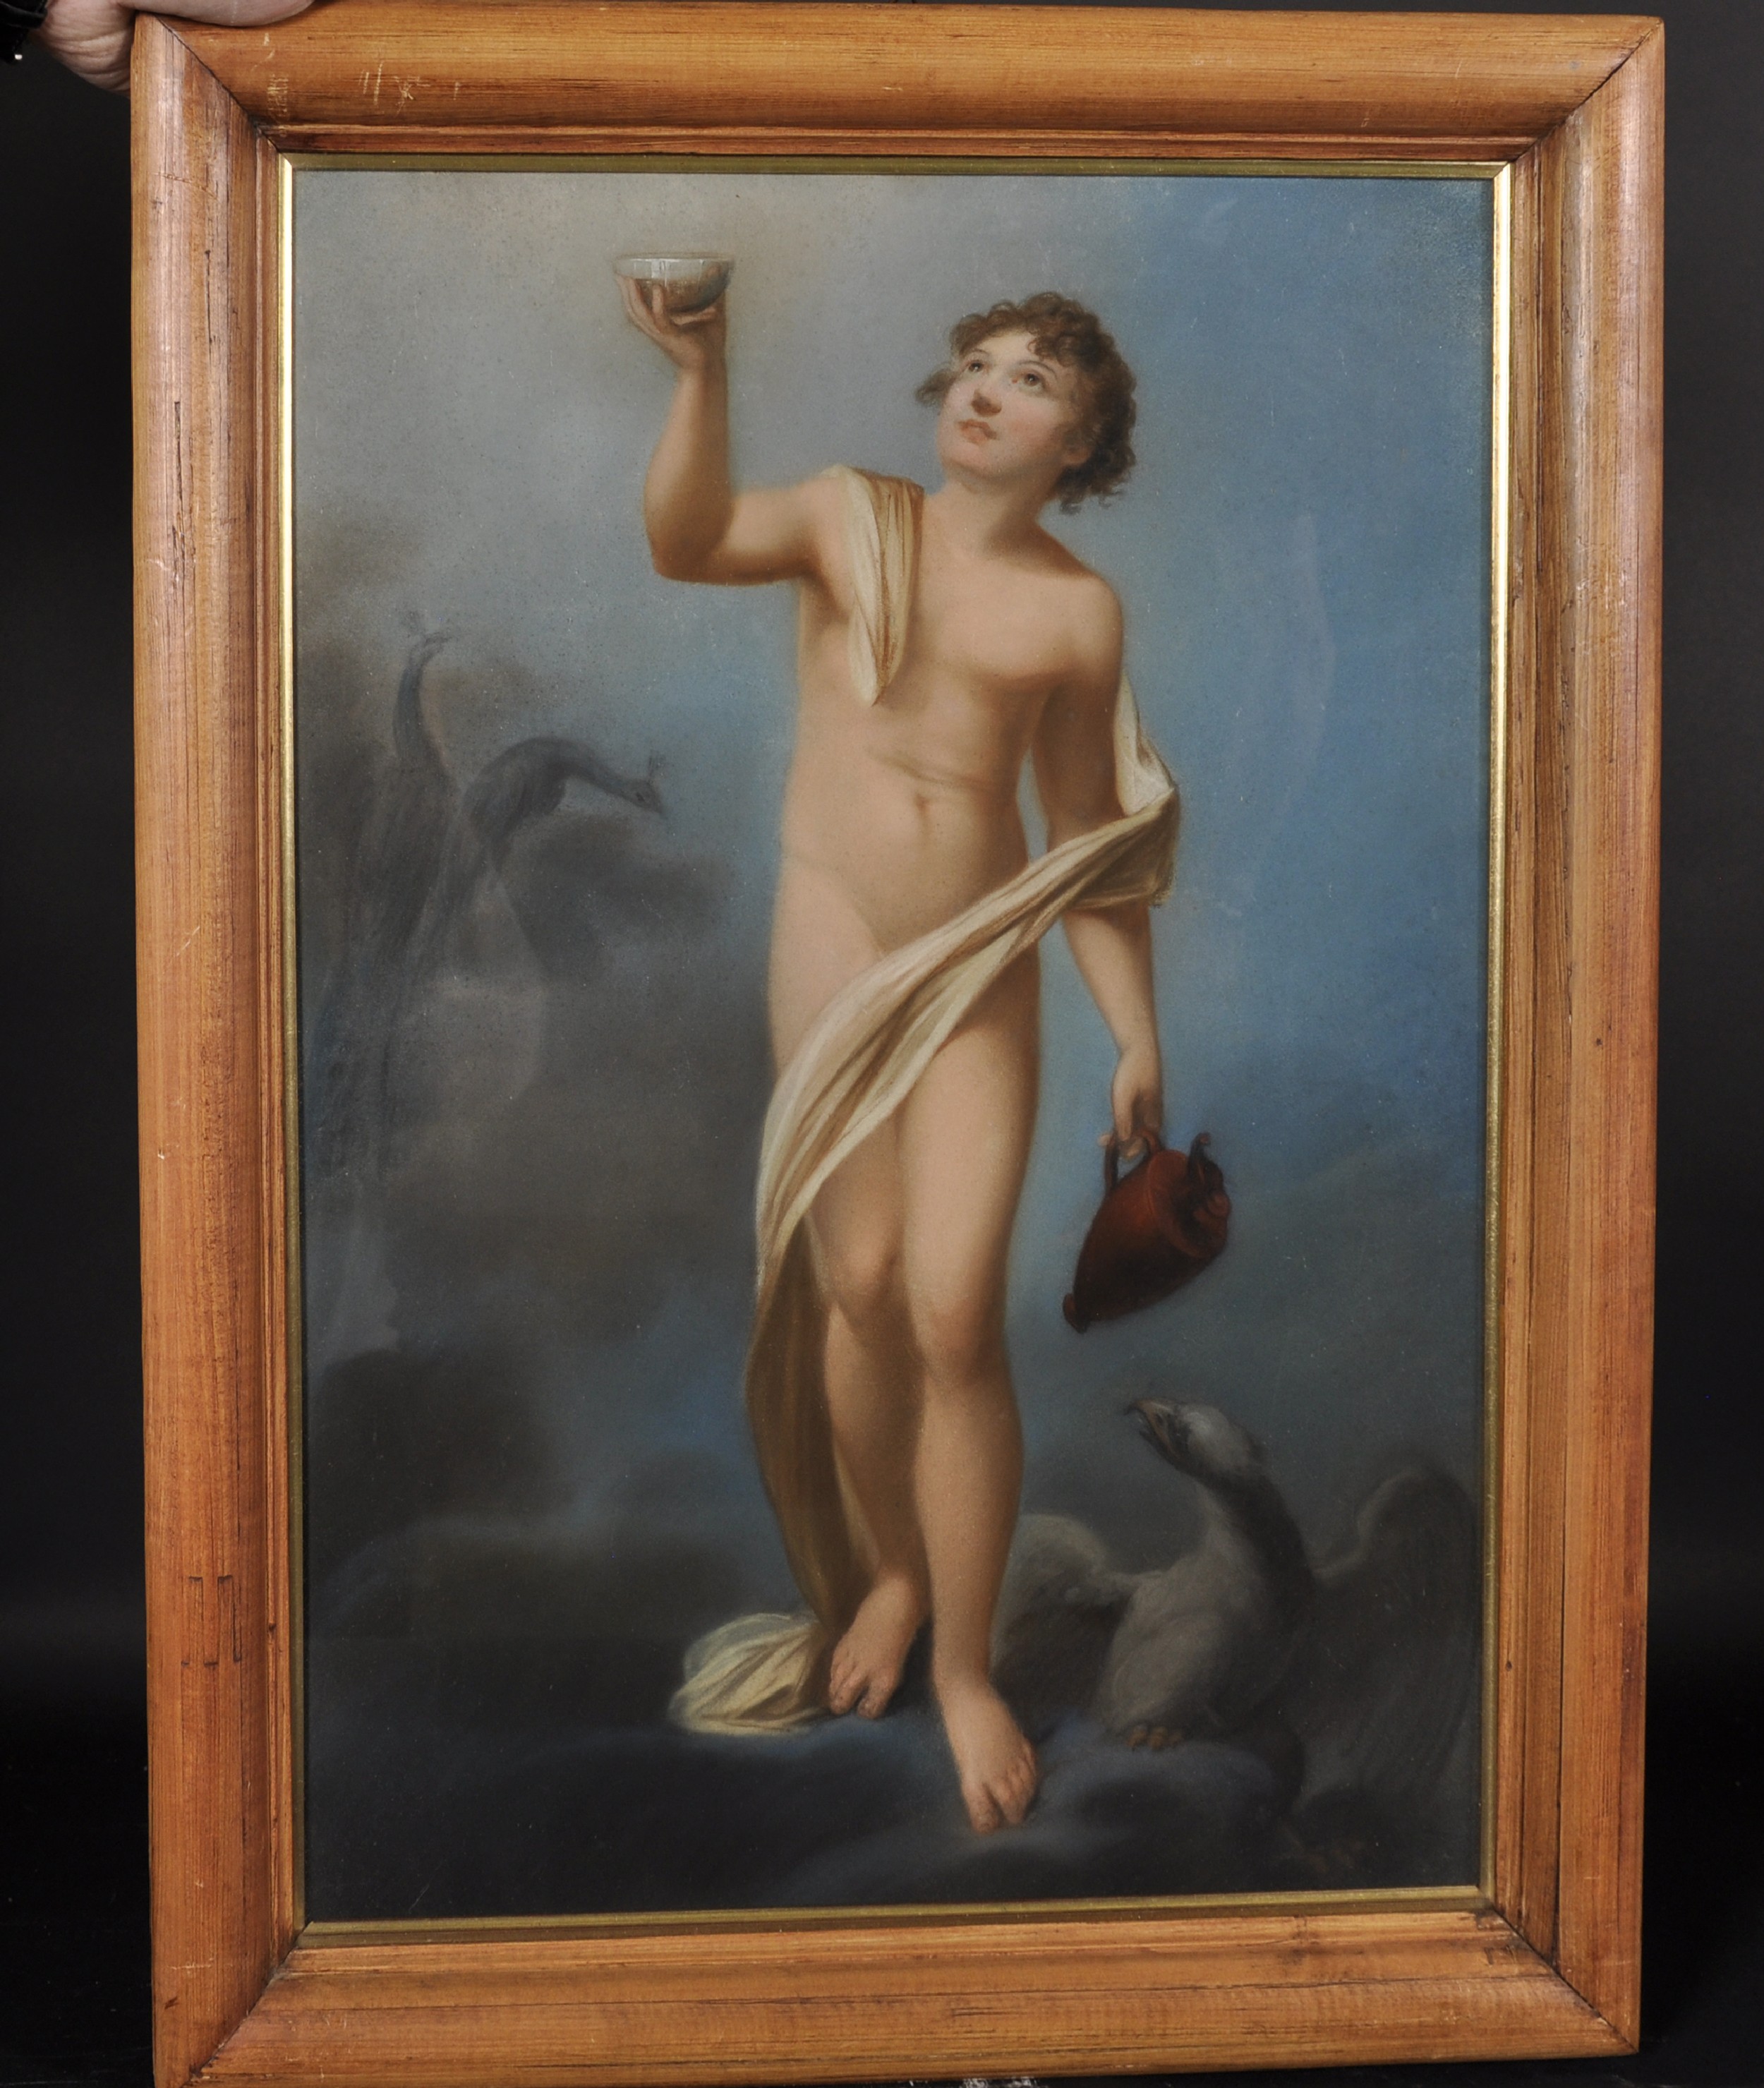 19th Century French School. Study of a Boy holding up a Cup, Pastel, 24.5" x 17.5", and the - Image 3 of 5